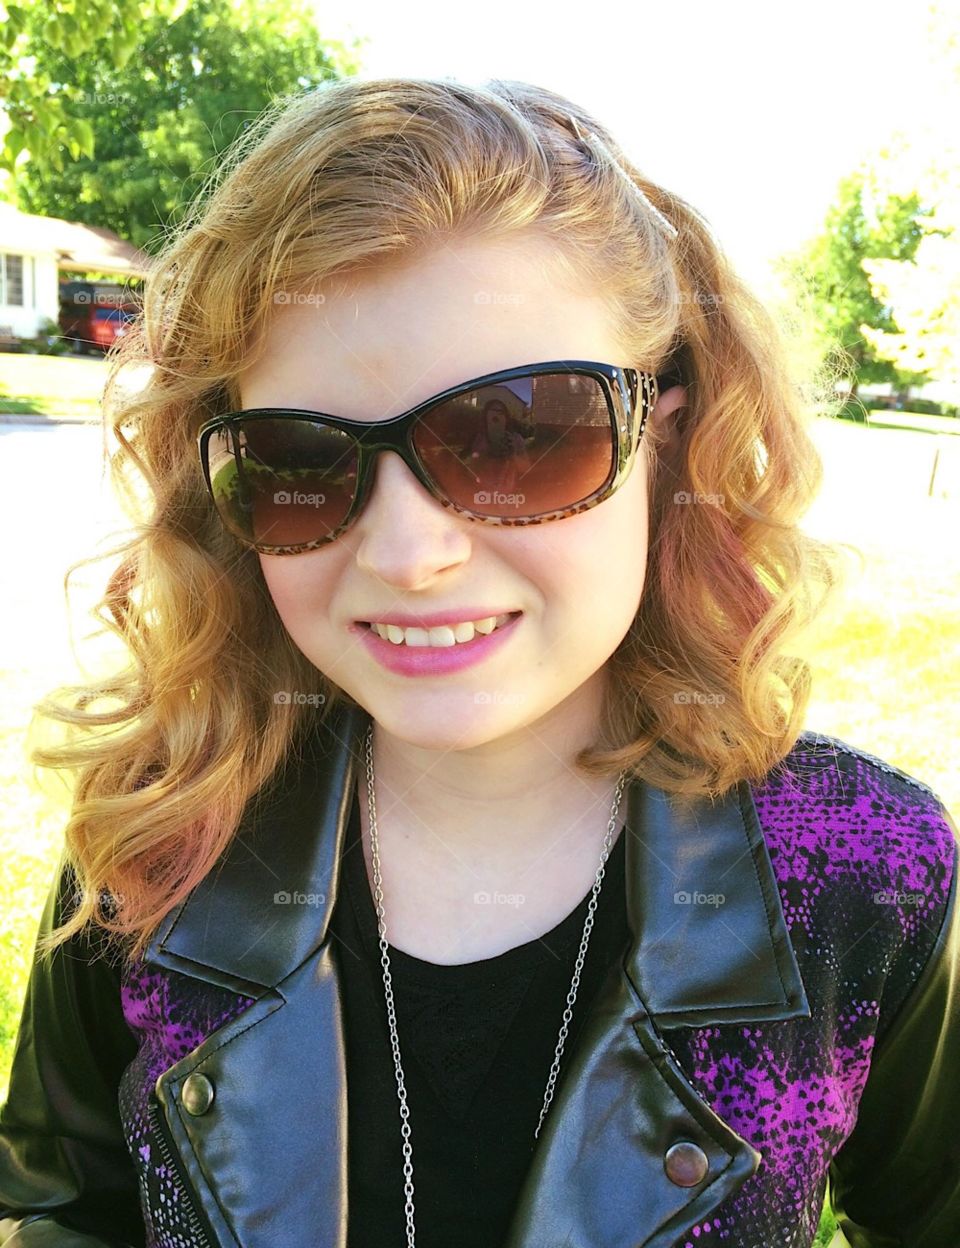 Lil’ poser, sporting her Mal jacket and sunglasses for school. 